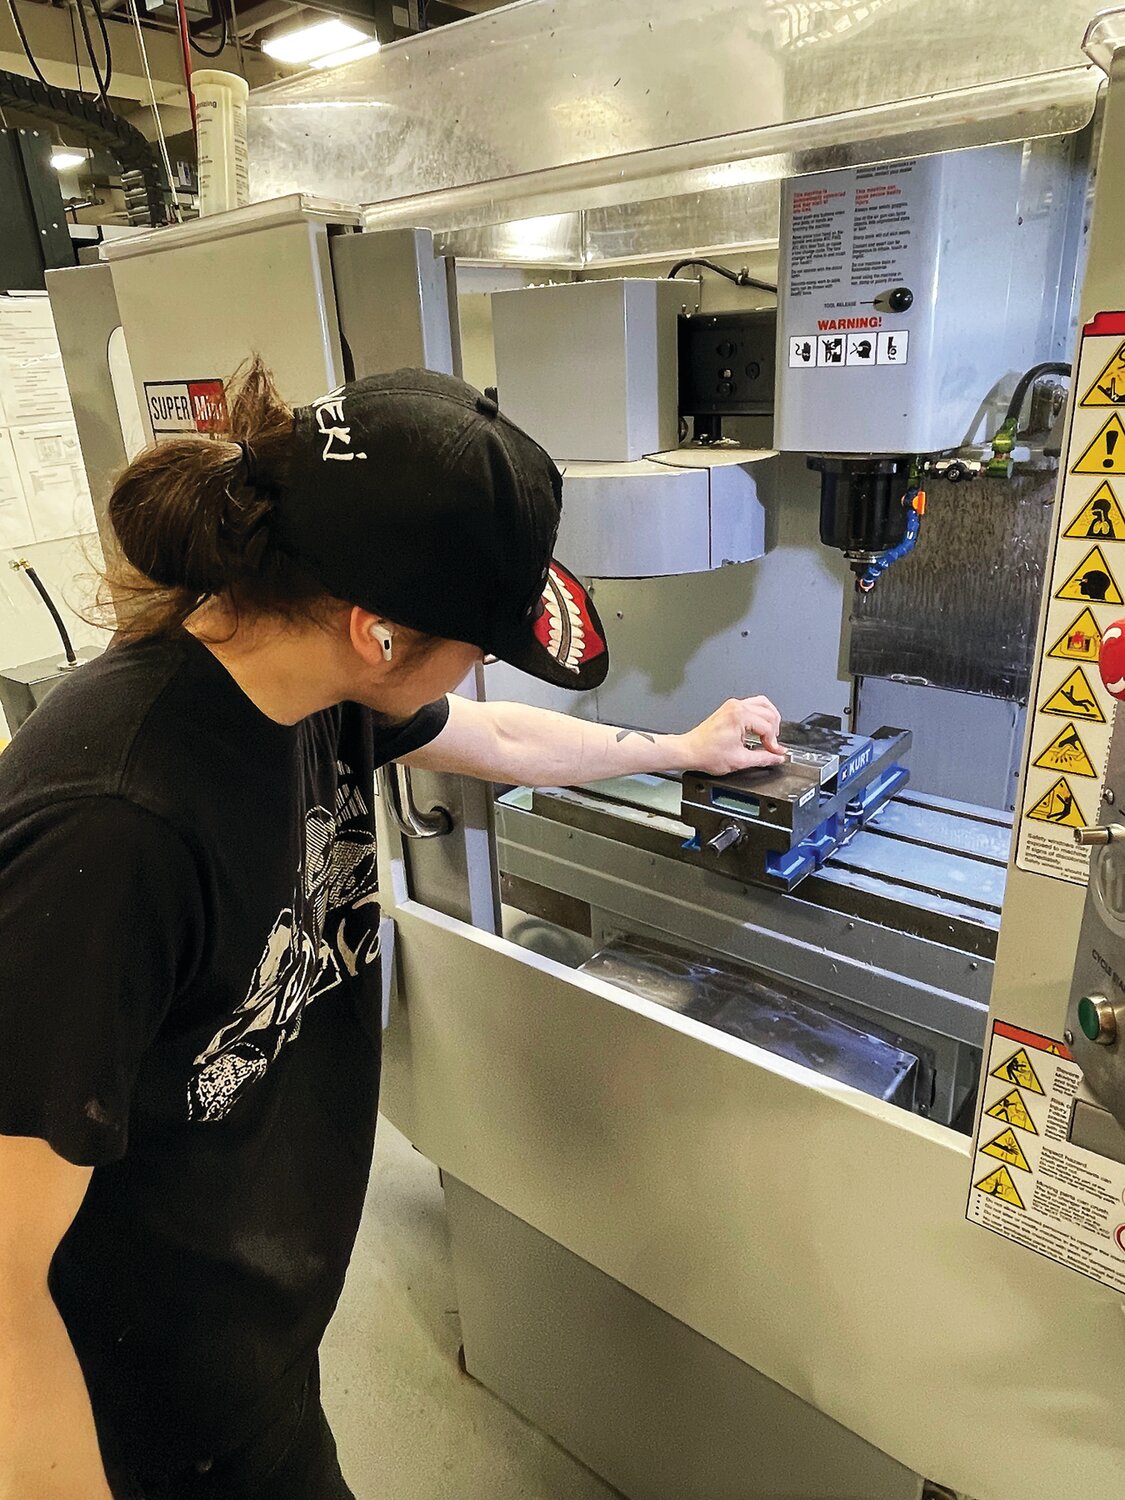 Upper Bucks County Technical School students are manufacturing parts to spec for the International Space Station using Fusion 360 CAD/CAM software and CNC machining centers.